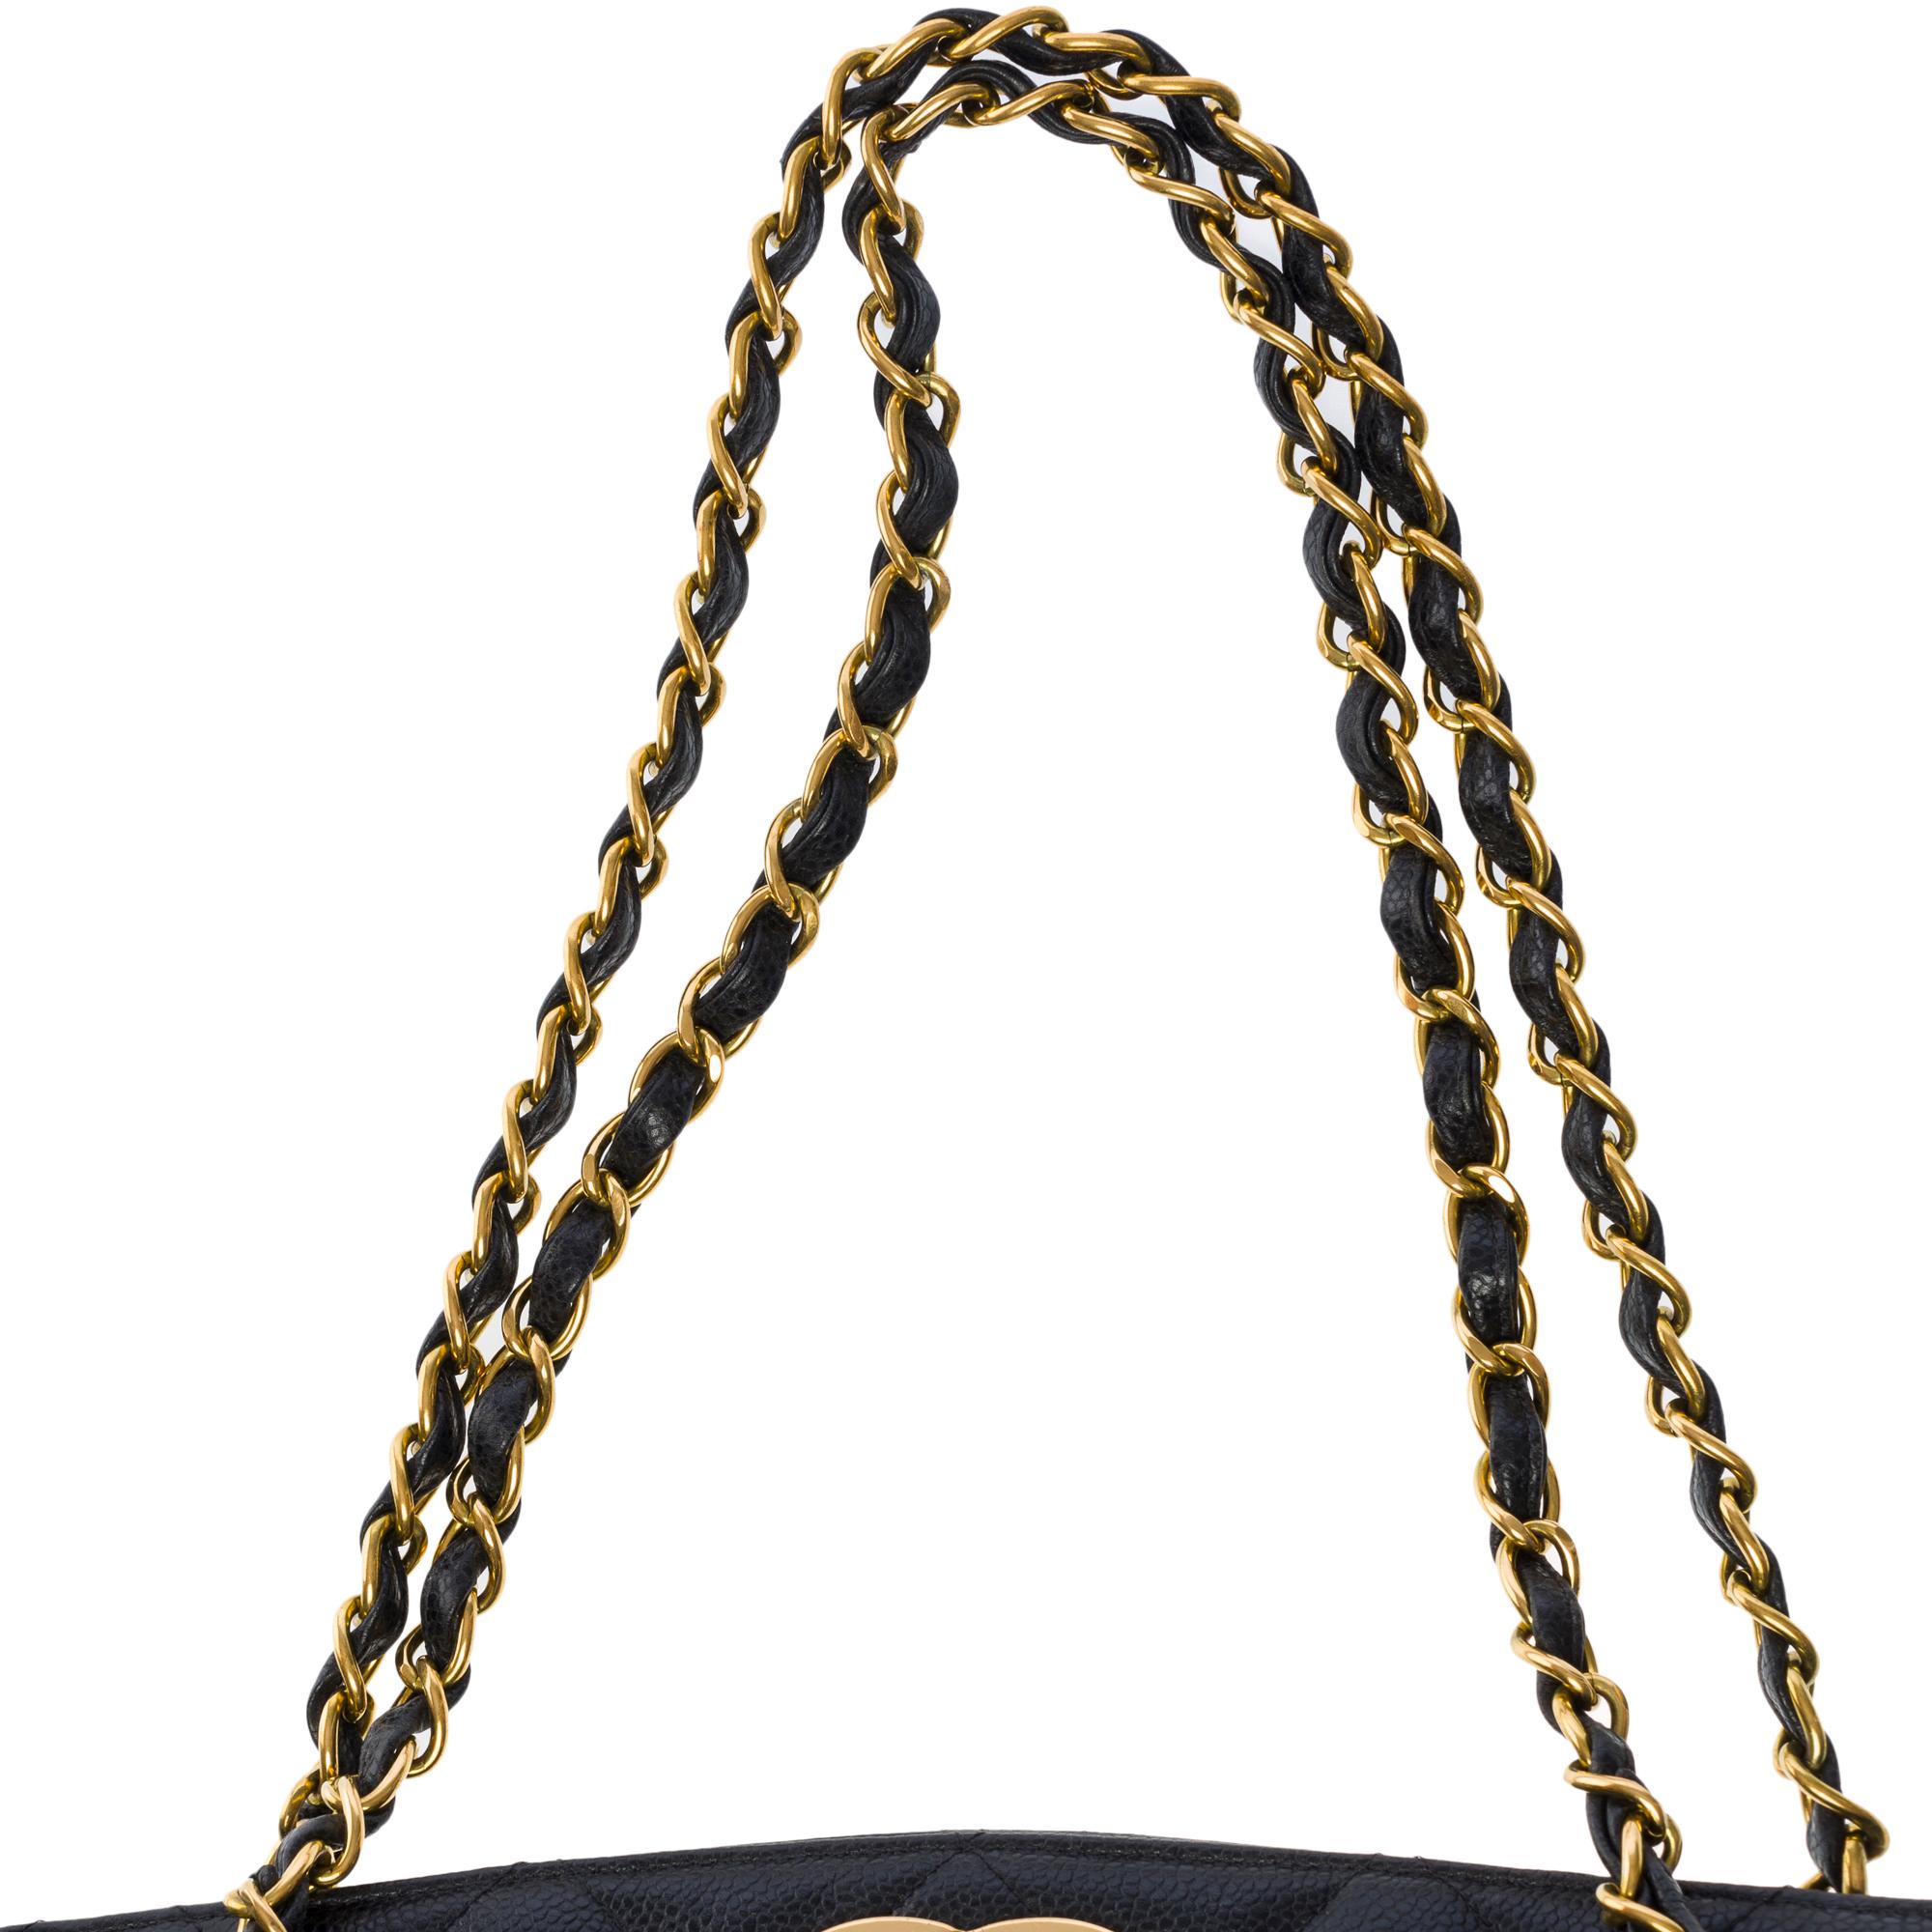 Amazing Chanel Shopping Tote bag in black Caviar quilted leather, GHW 5